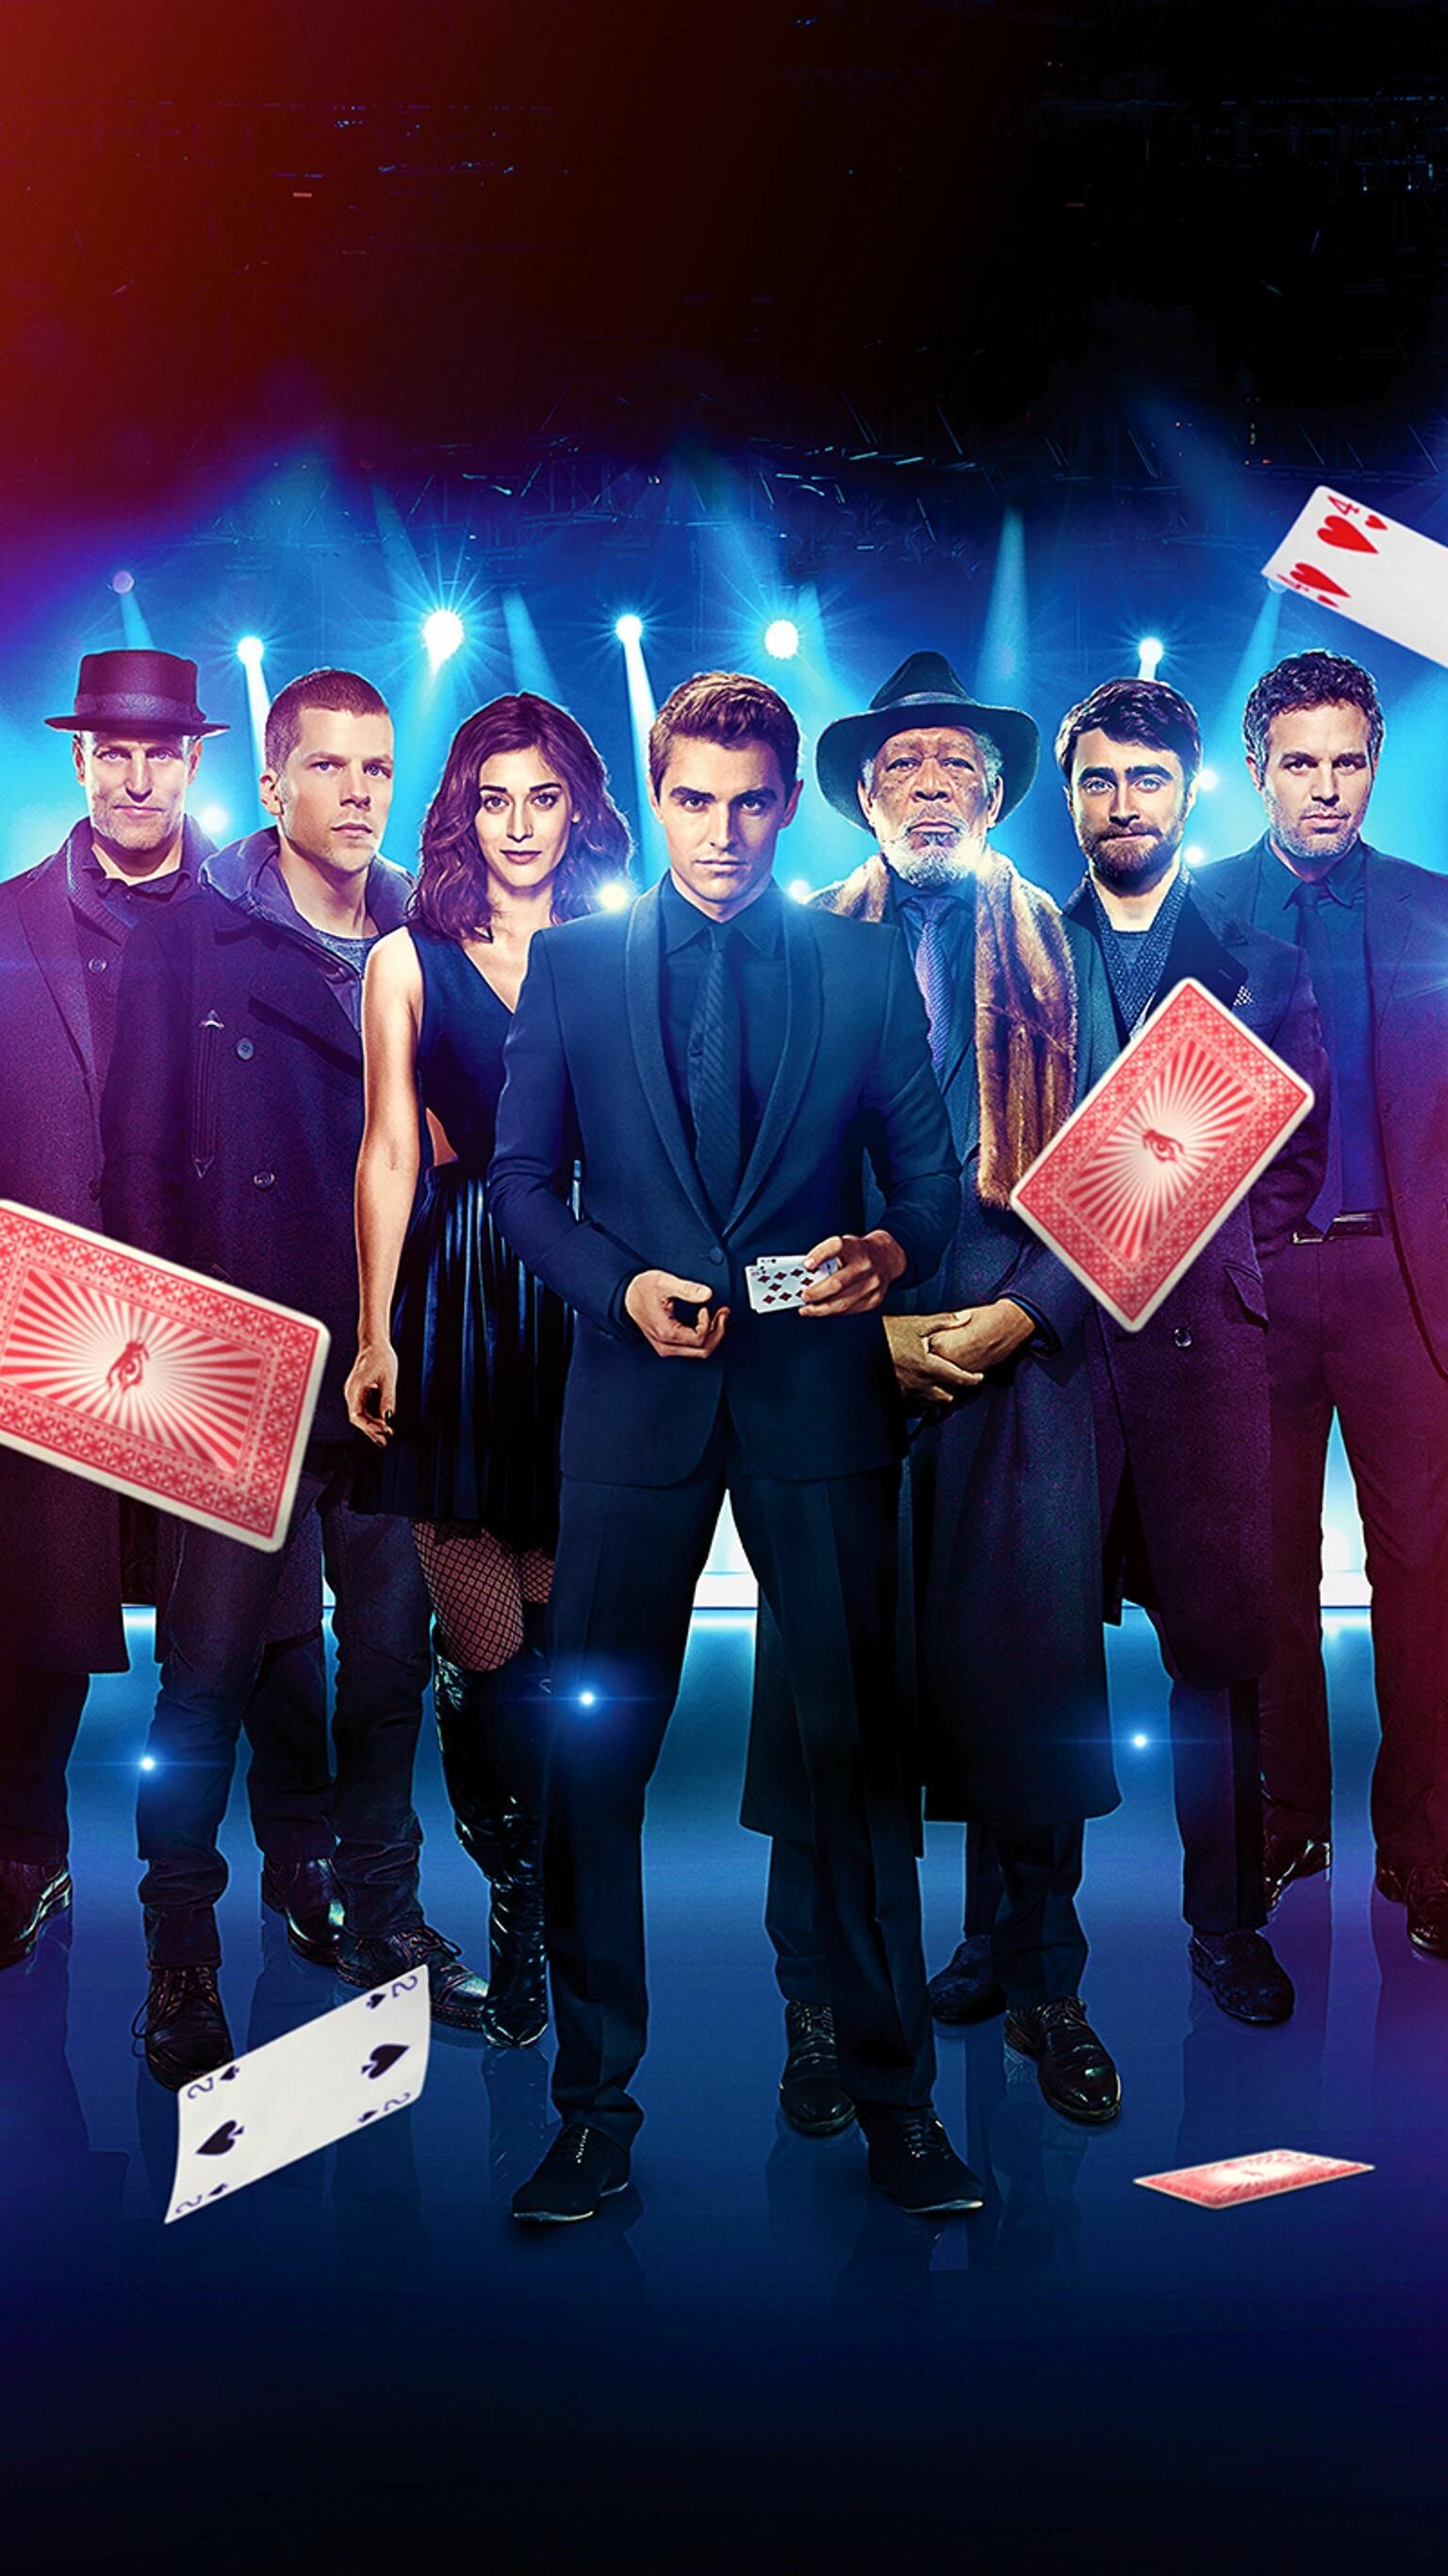 Dave Franco: Played Jack Wilder, a magician specializing in card tricks in Now You See Me 2 (2016). 1540x2740 HD Wallpaper.